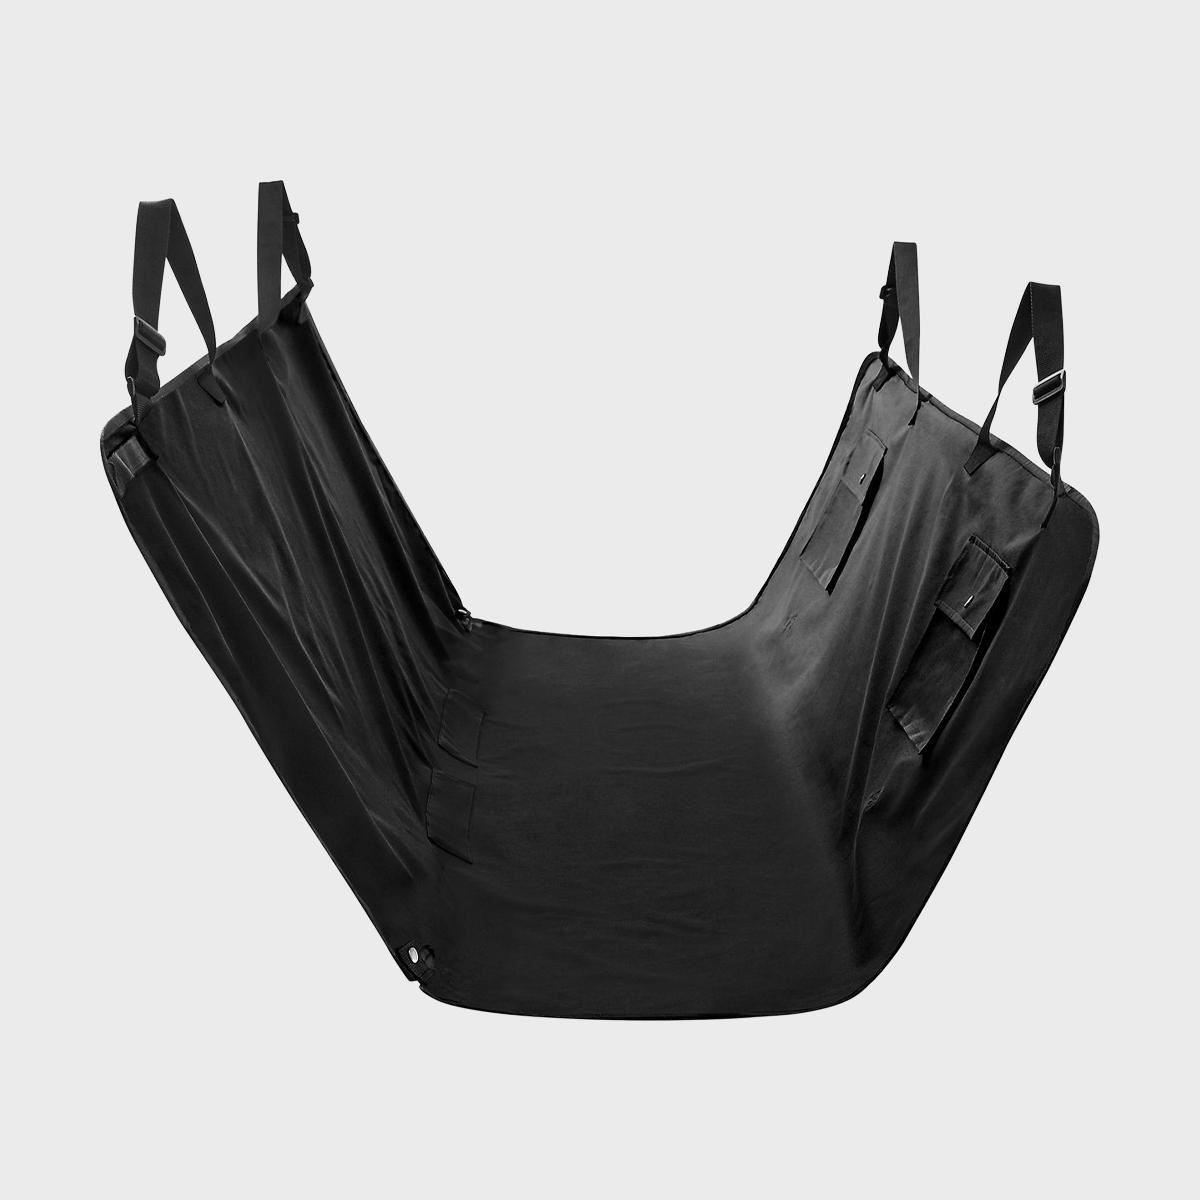 https://www.rd.com/wp-content/uploads/2022/07/frisco-water-resistant-hammock-car-ecomm-via-chewy.png?fit=700%2C700